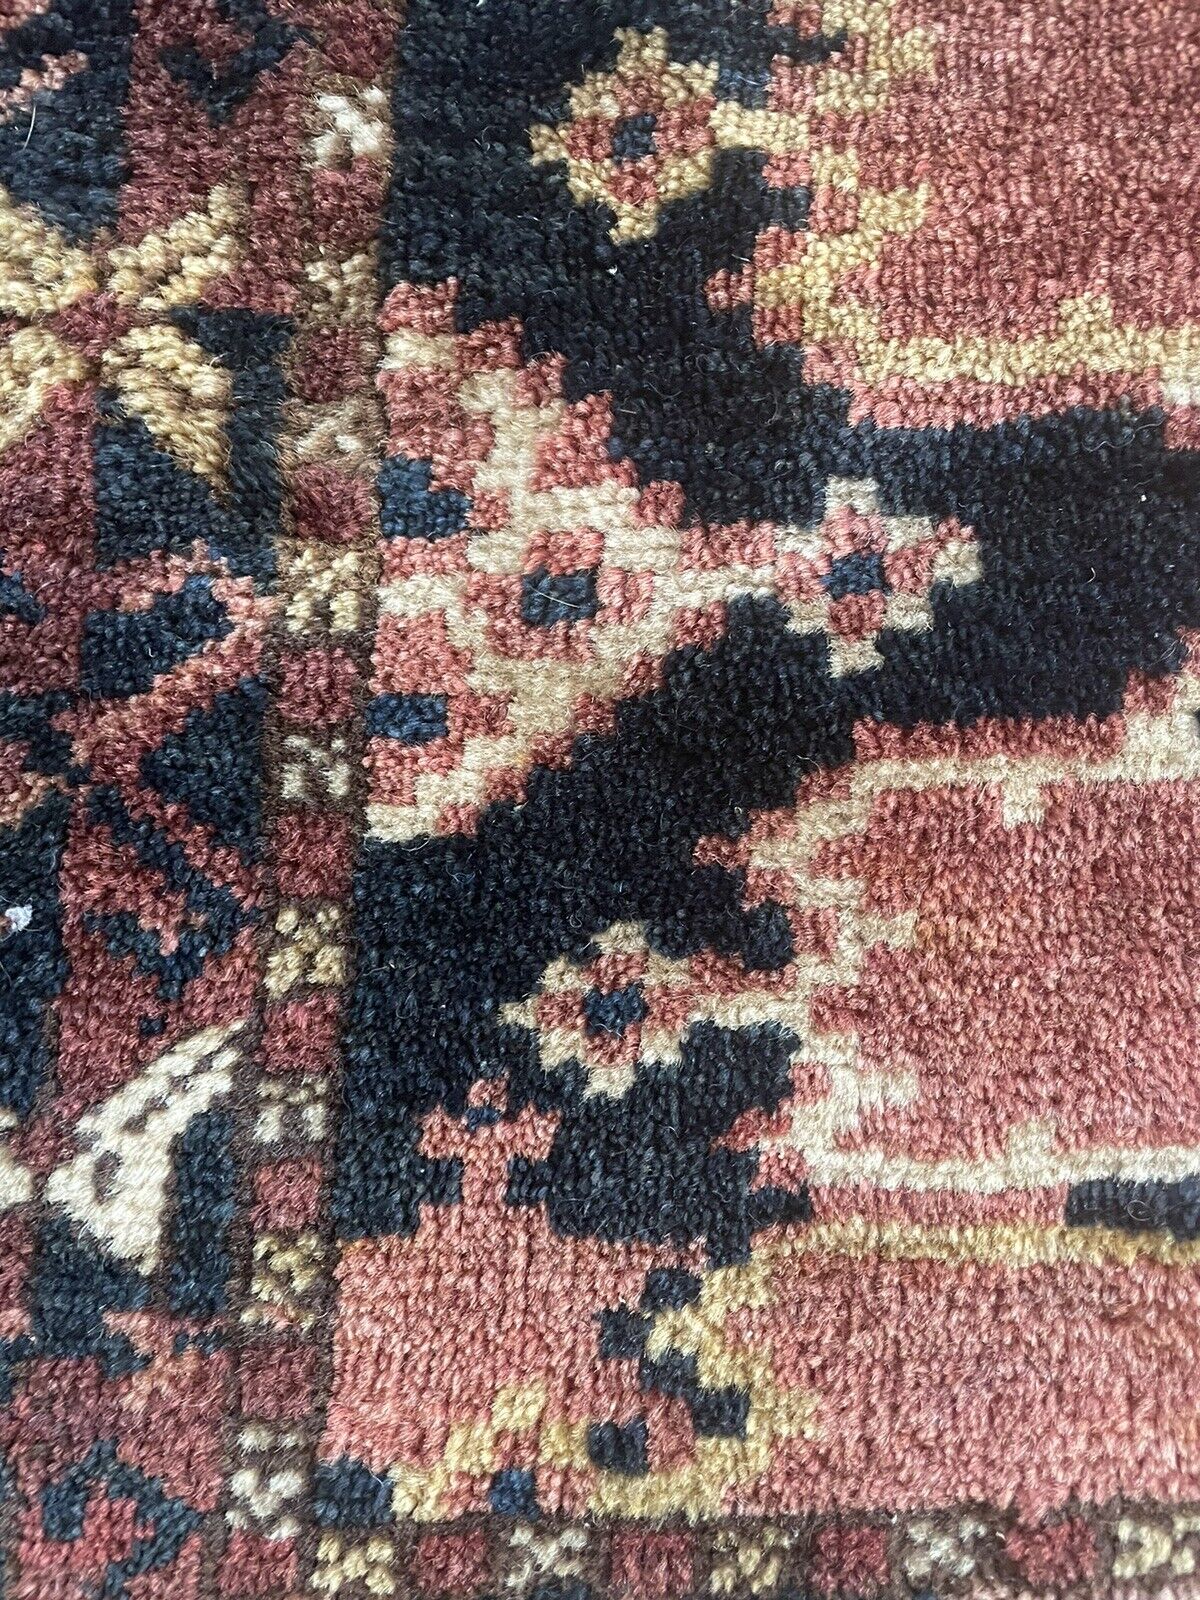 Close-up of border designs on Handmade Antique Afghan Beshir Collectible Chuval Rug - Detailed view showcasing the detailed border designs along the edges of the rug, enhancing its overall aesthetic and cultural significance.